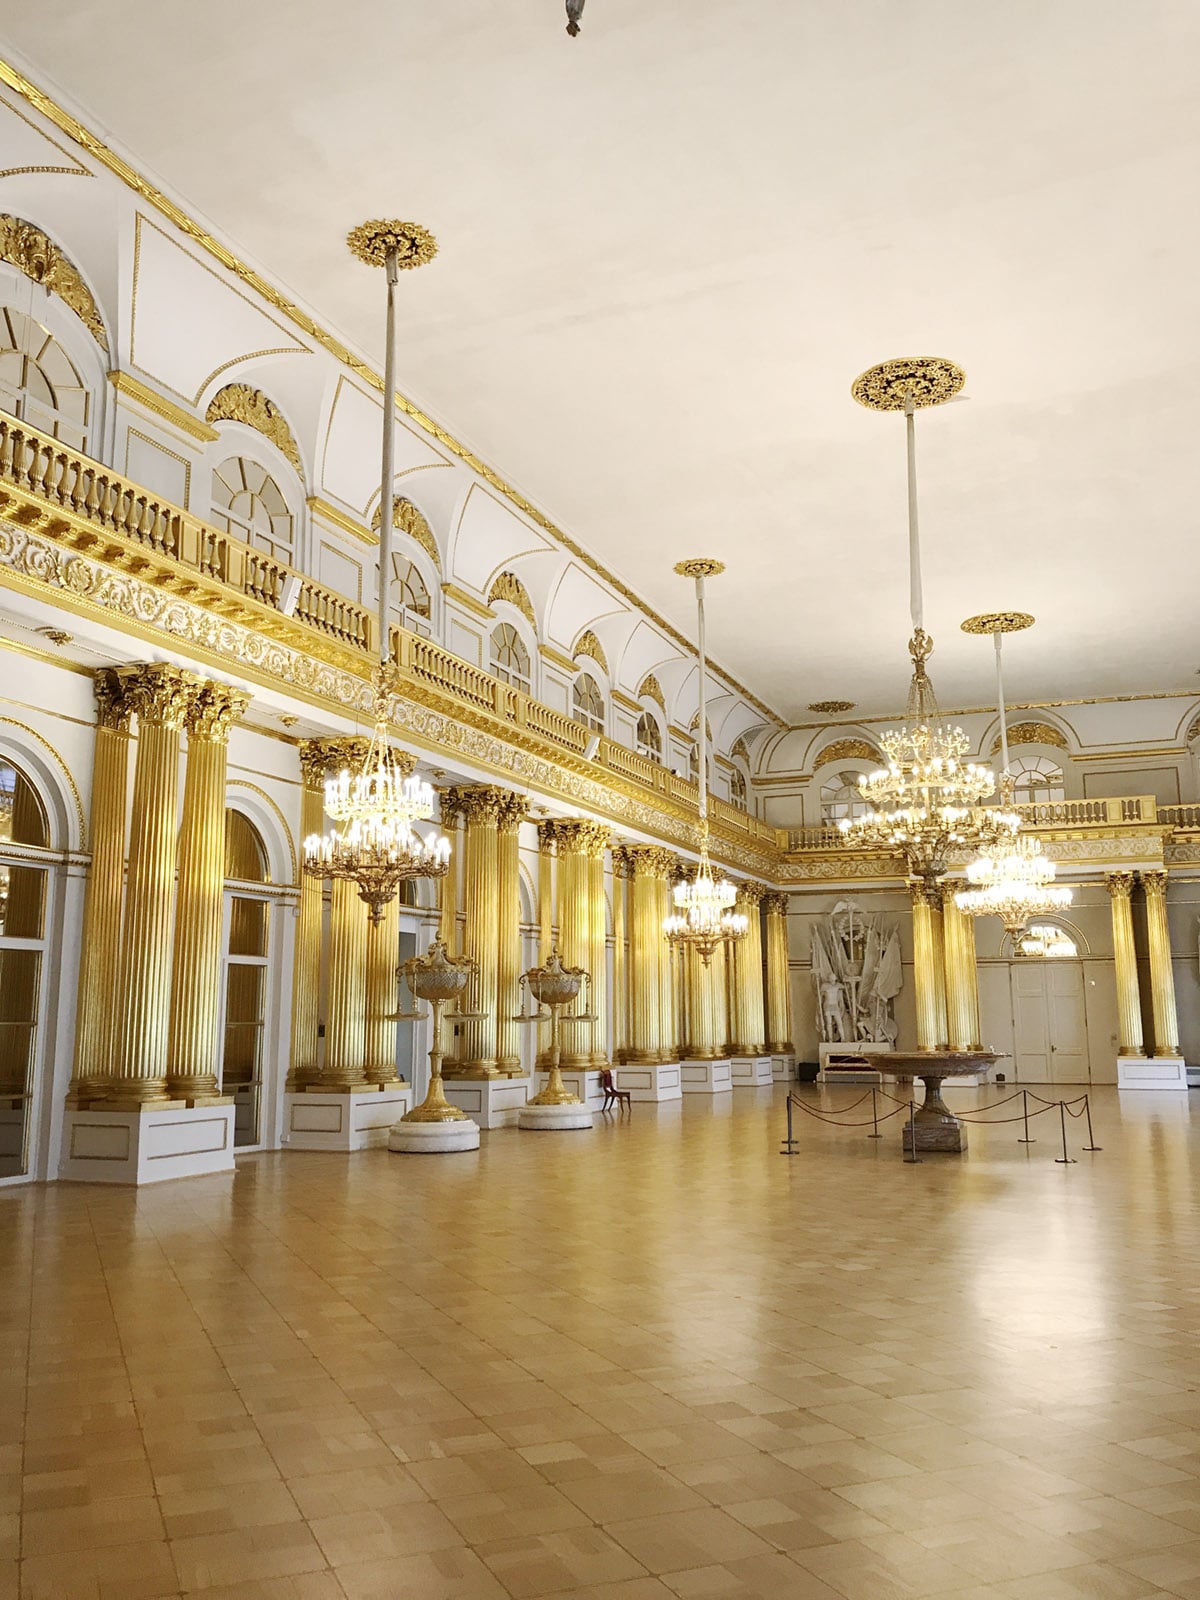 gold and white in the Hermitage Museum | St. Petersburg travel guide on coco kelley